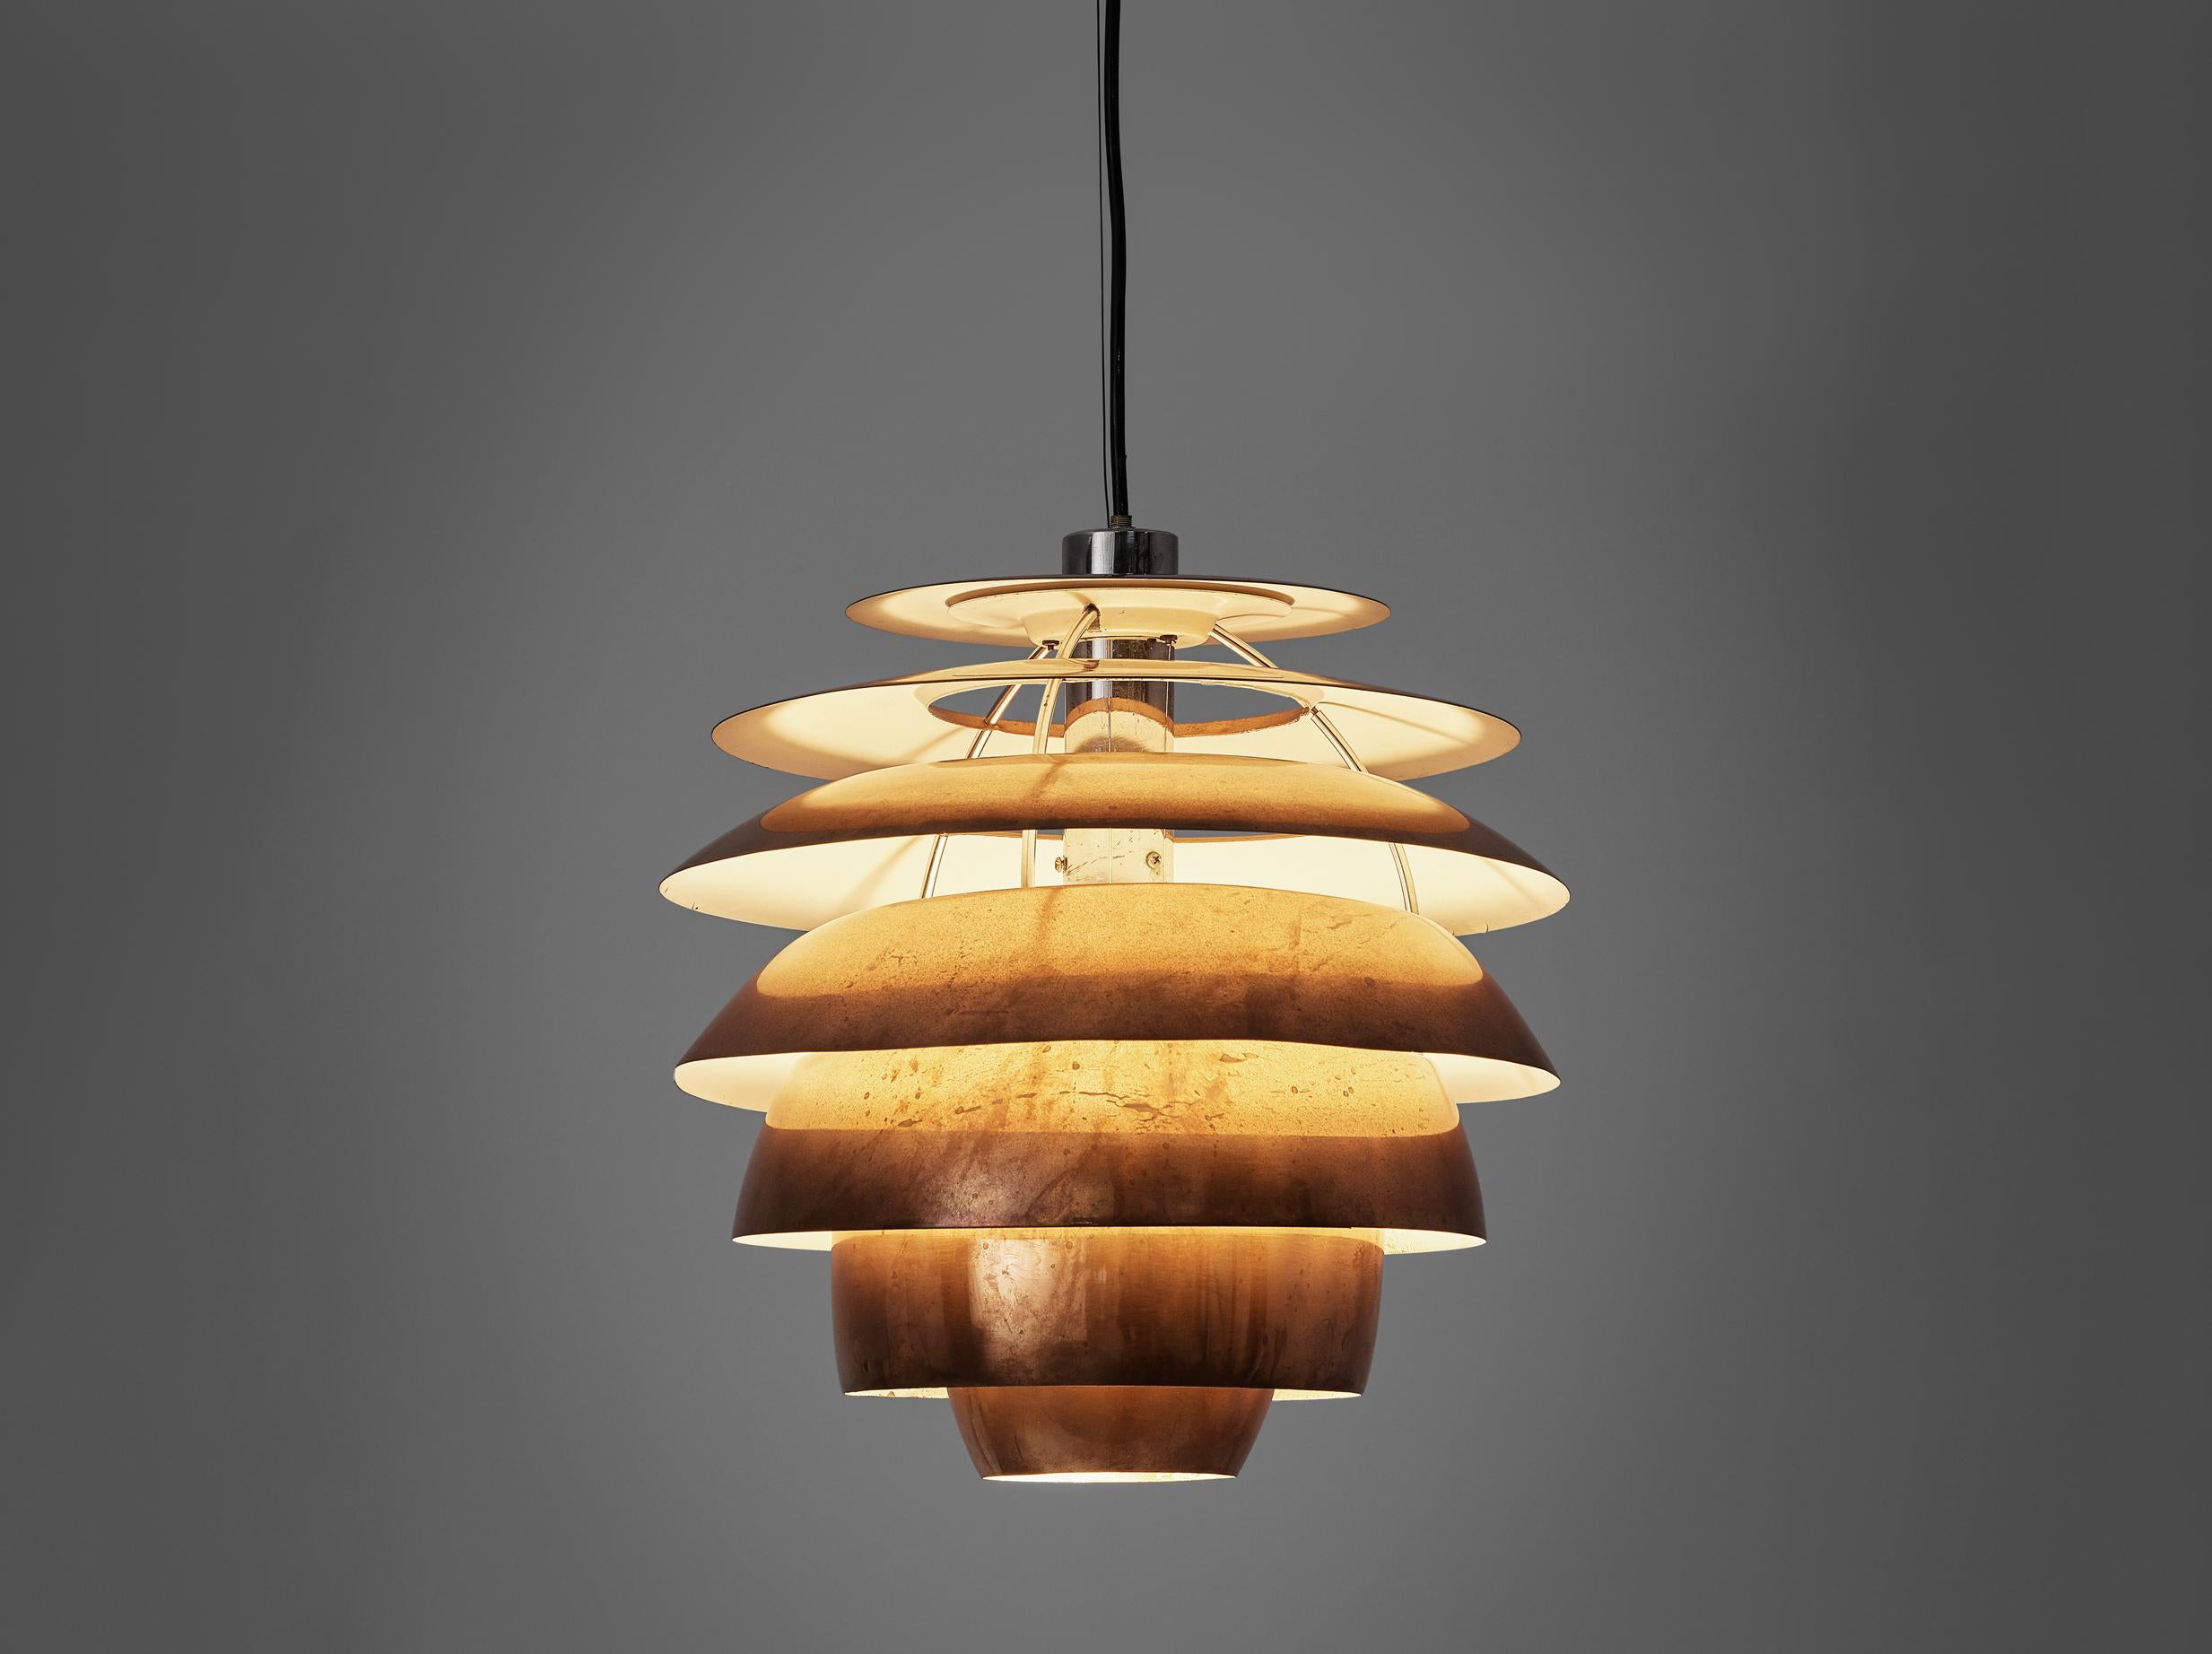 Stilnovo, pendant, model 1231, copper, colored metal, Italy, 1960s.

This Stilnovo pendant has the shape of a 'beehive' and is built up of several copper layers that are white lacquered on the inside. The shades emit a soft glow while concealing